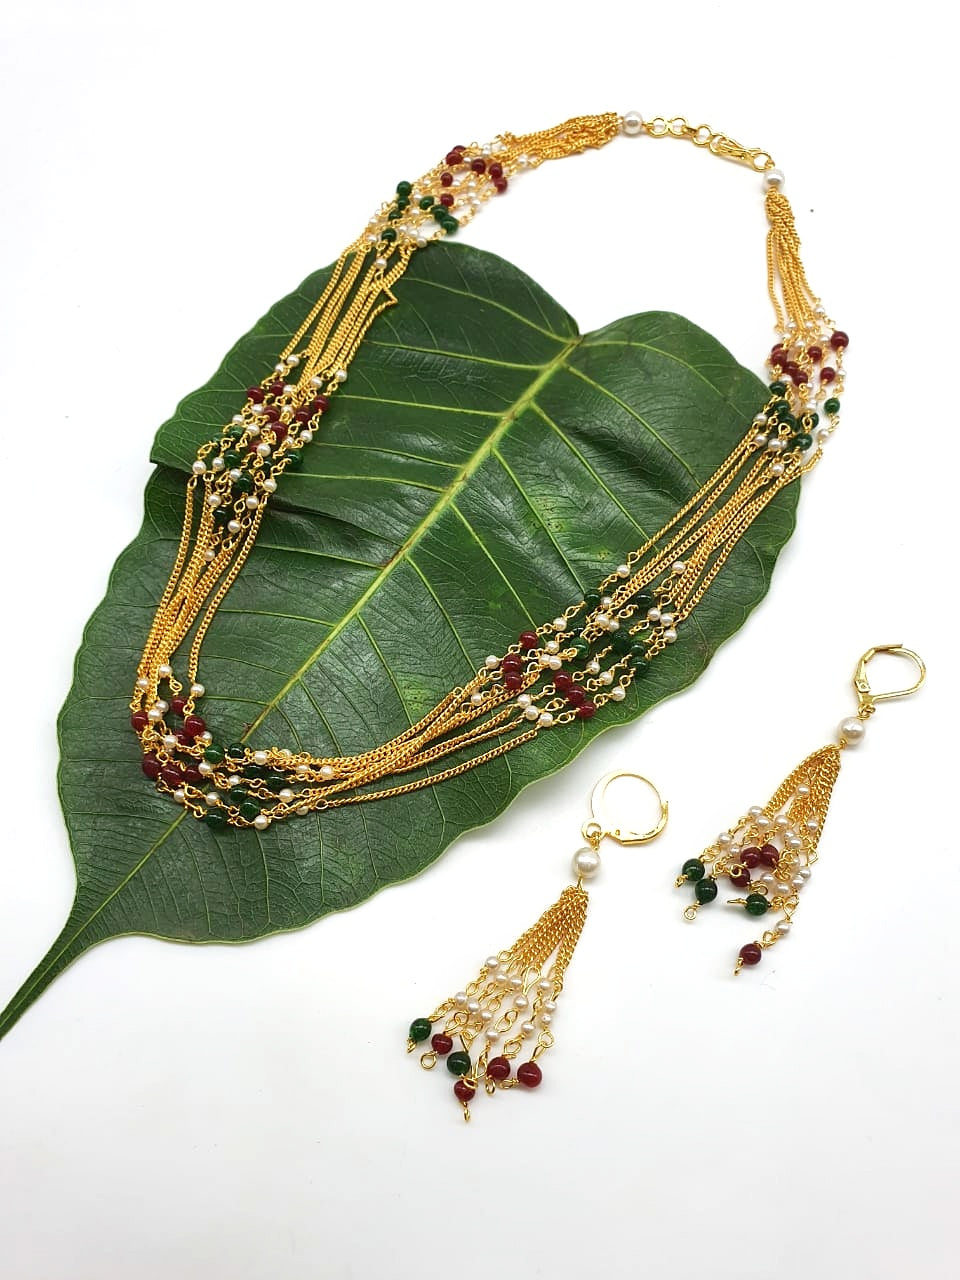 Digital Dress Room Latest Short Necklace Set Designs in Gold Finish Multicolor Beads Necklace & Earrings